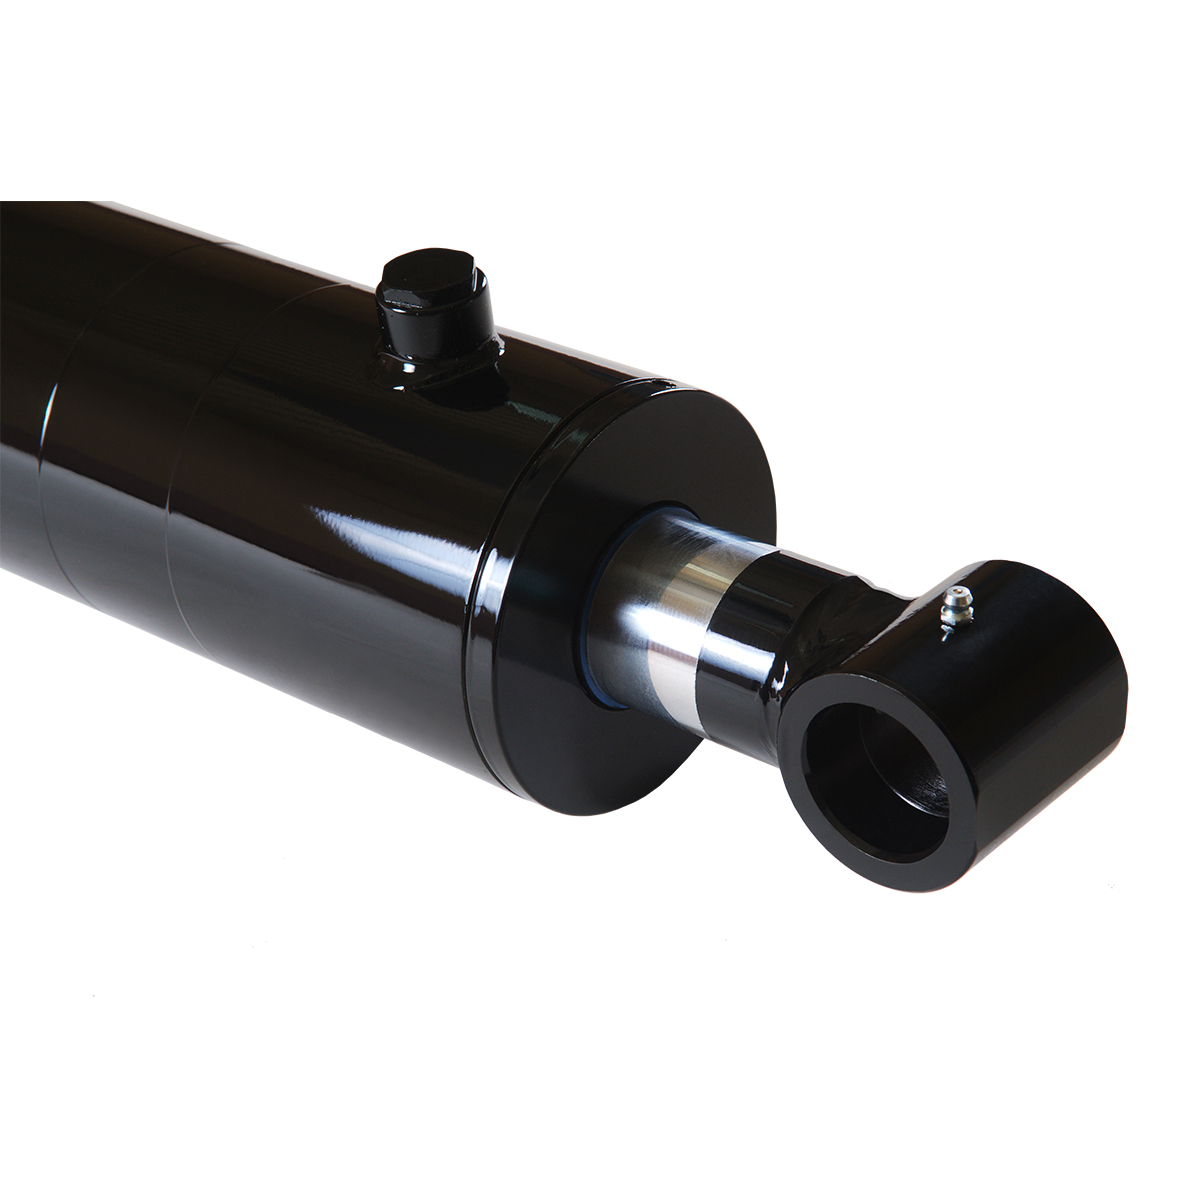 4 bore x 18 stroke hydraulic cylinder, welded cross tube double acting cylinder | Magister Hydraulics